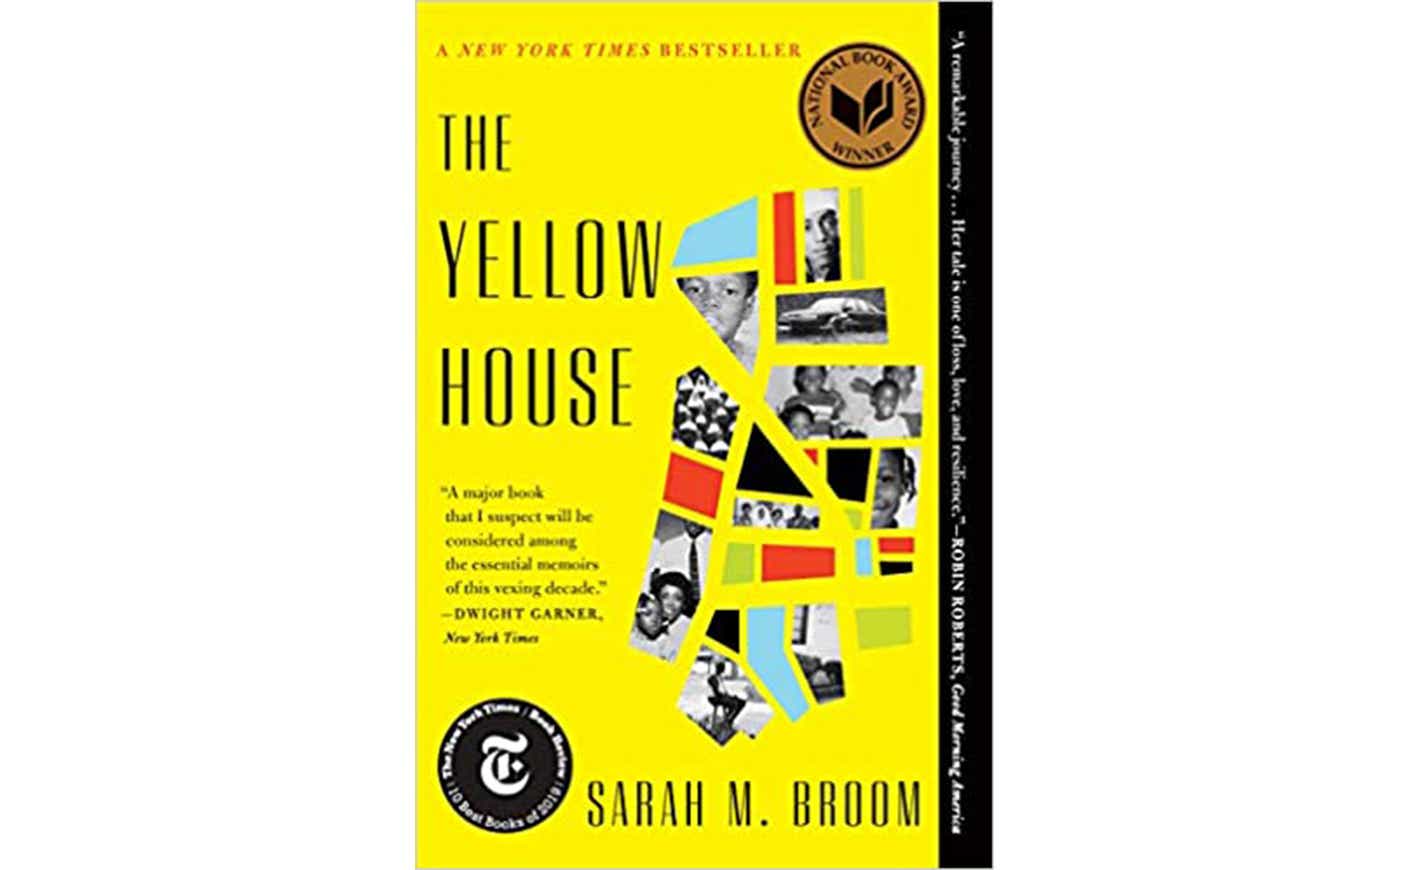 The Yellow House by Sarah